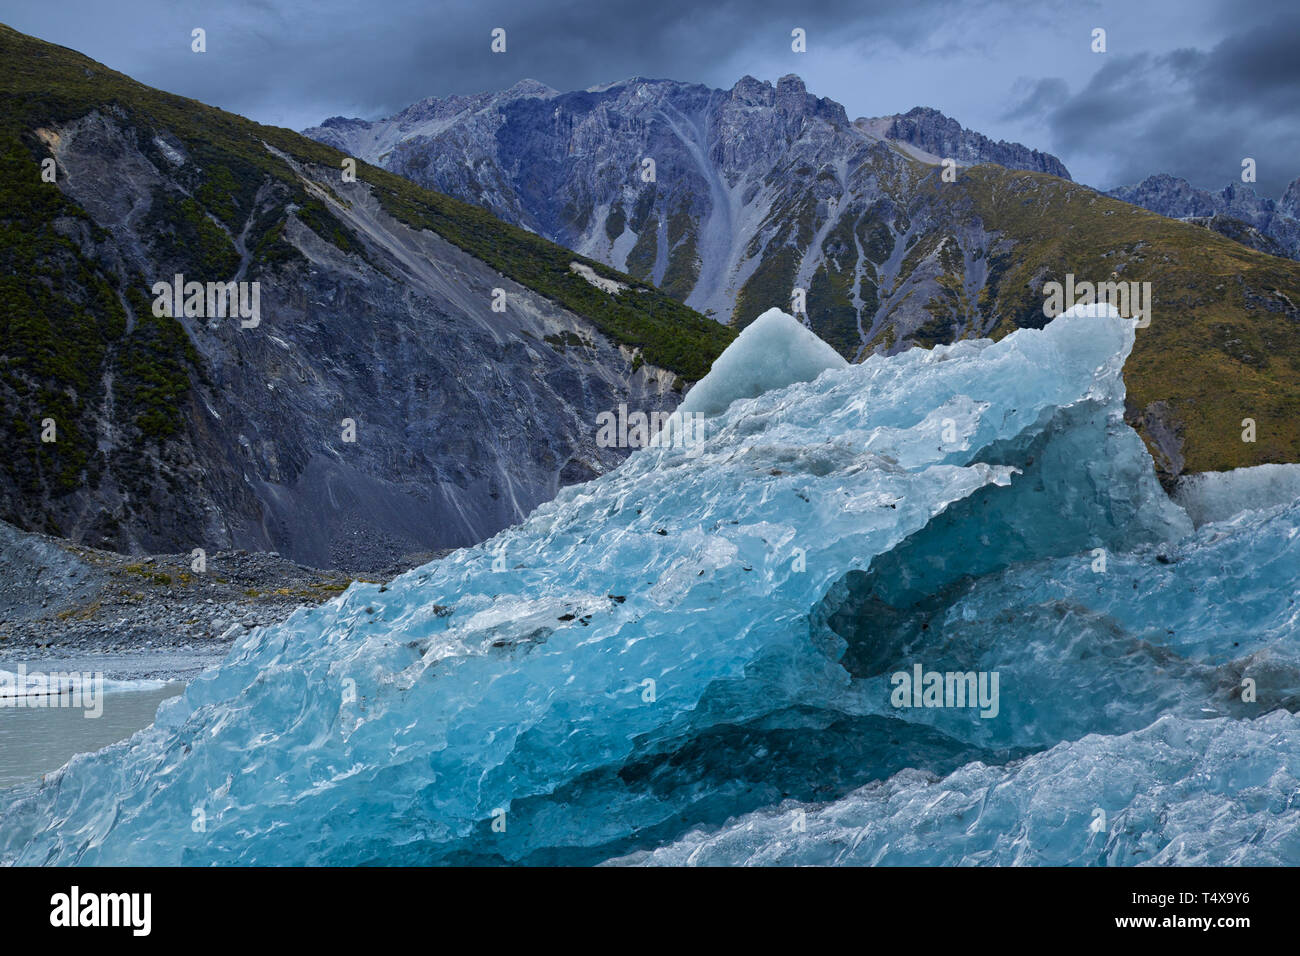 Aoraki/Mt Cook, New Zealand: Ice flow on Tasman Lake with a backdrop of rugged mountains, South Island, New Zealand. Stock Photo